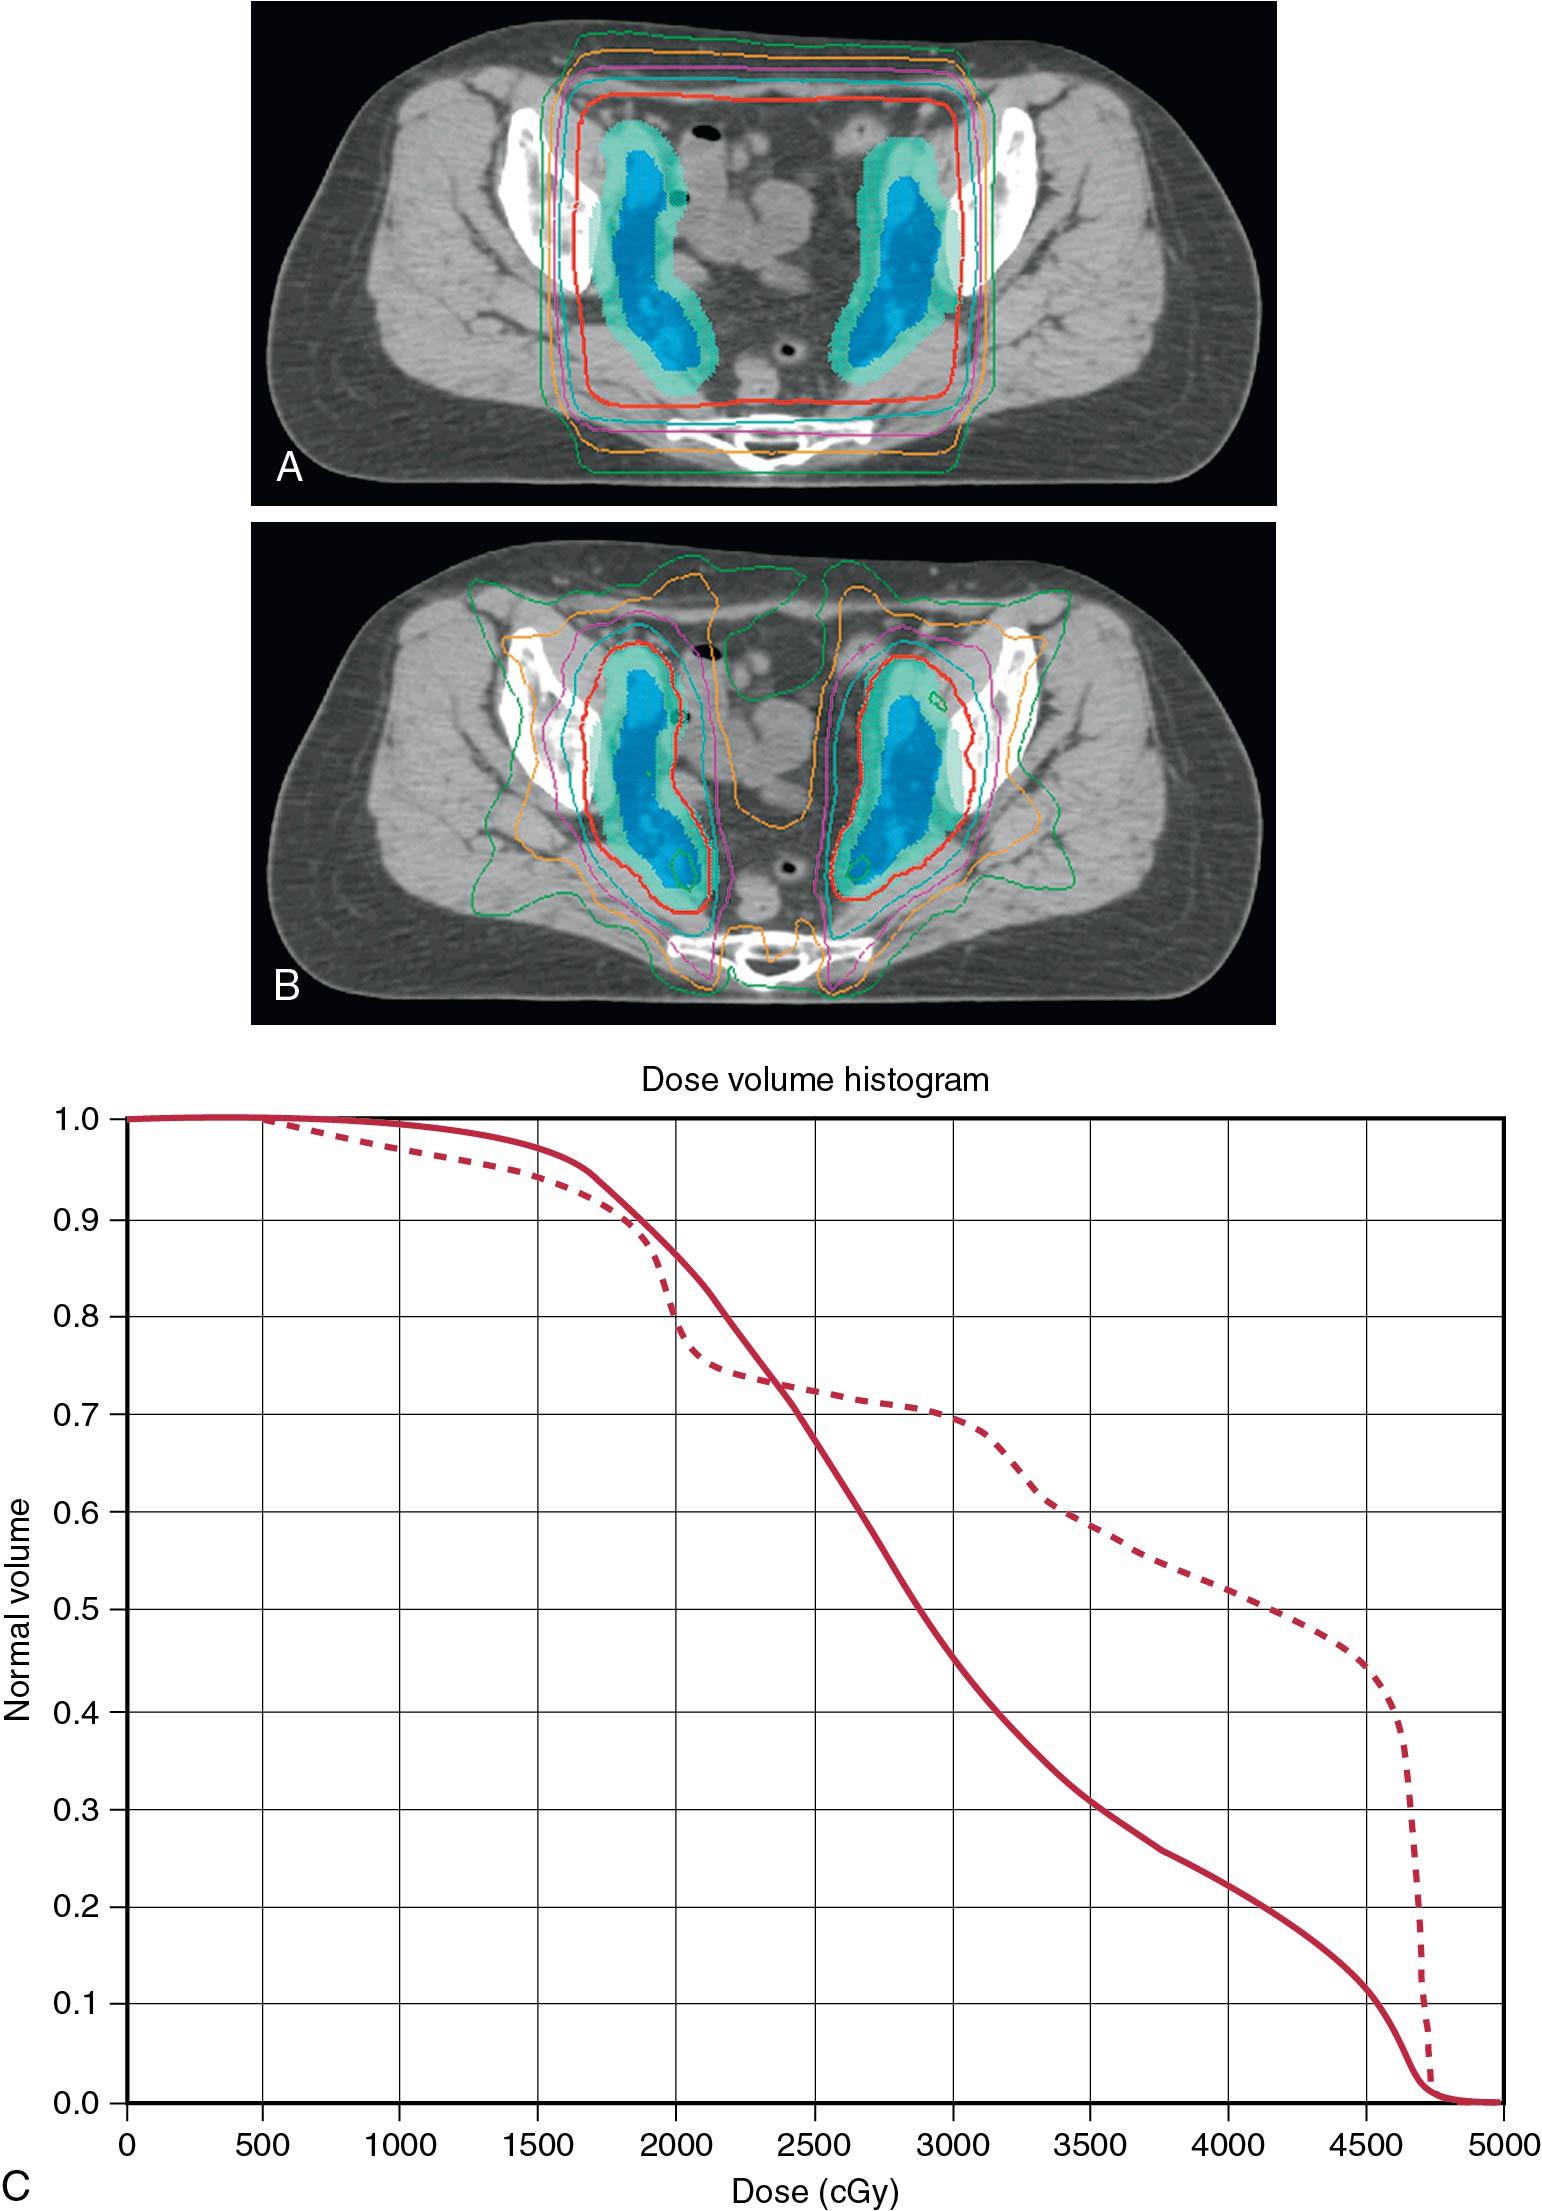 Fig. 28.7, Treatment plan. A, The distribution of dose with a standard three-dimensional (3D) plan. The red line is the 45 Gy isodose line and, as shown, everything within the red line gets 45 Gy, including all the bowel. B, The distribution of dose using intensity-modulated radiotherapy (IMRT). Again, the red line is the 45 Gy isodose line, and what can clearly be seen is the sparing of bowel using IMRT. C, The dose to bowel—the dotted line is the bowel dose using the 3D plan and the solid line is the bowel dose using the IMRT plan. As shown, with IMRT, the bowel gets a less high dose compared with the 3D plan.